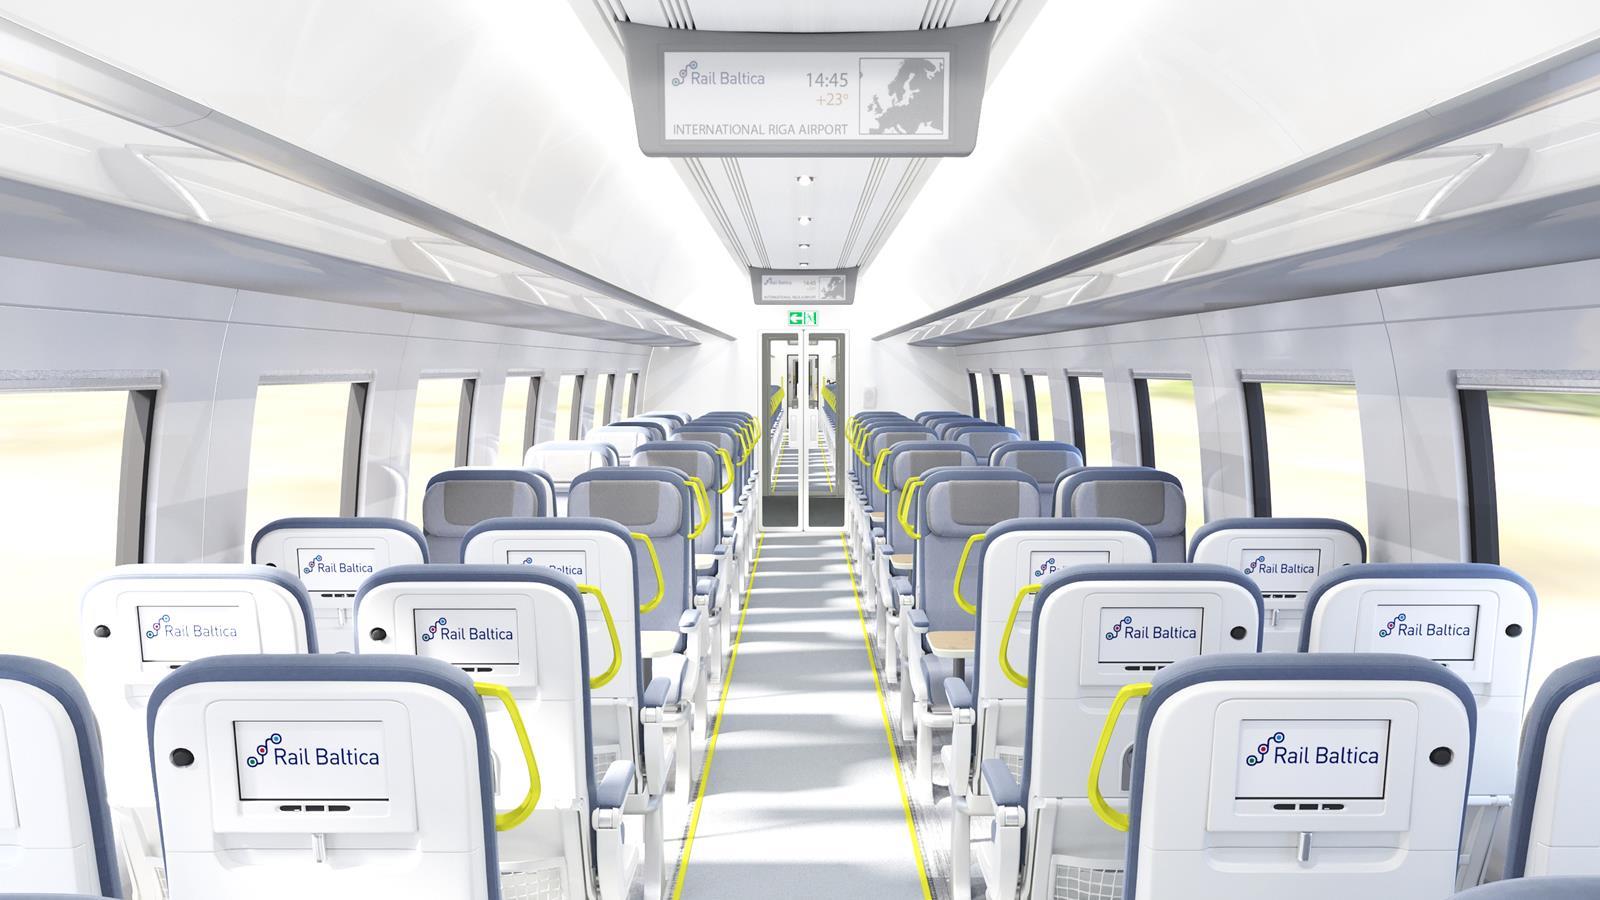 The conceptual eight-car train has approximately 70 seats per coach in standard class,